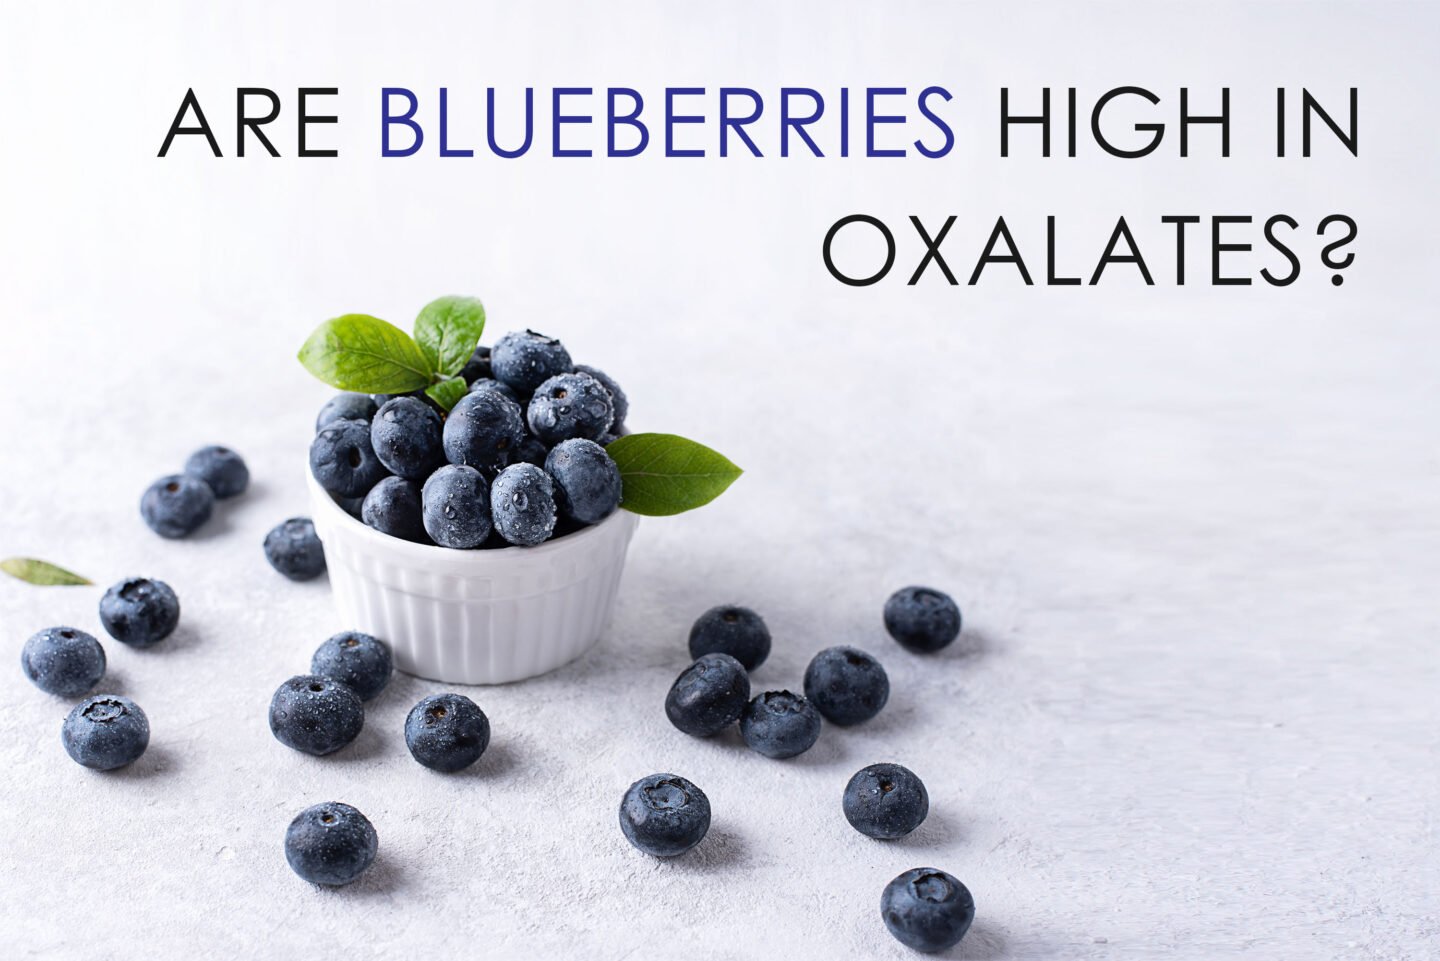 are blueberries high in oxalates